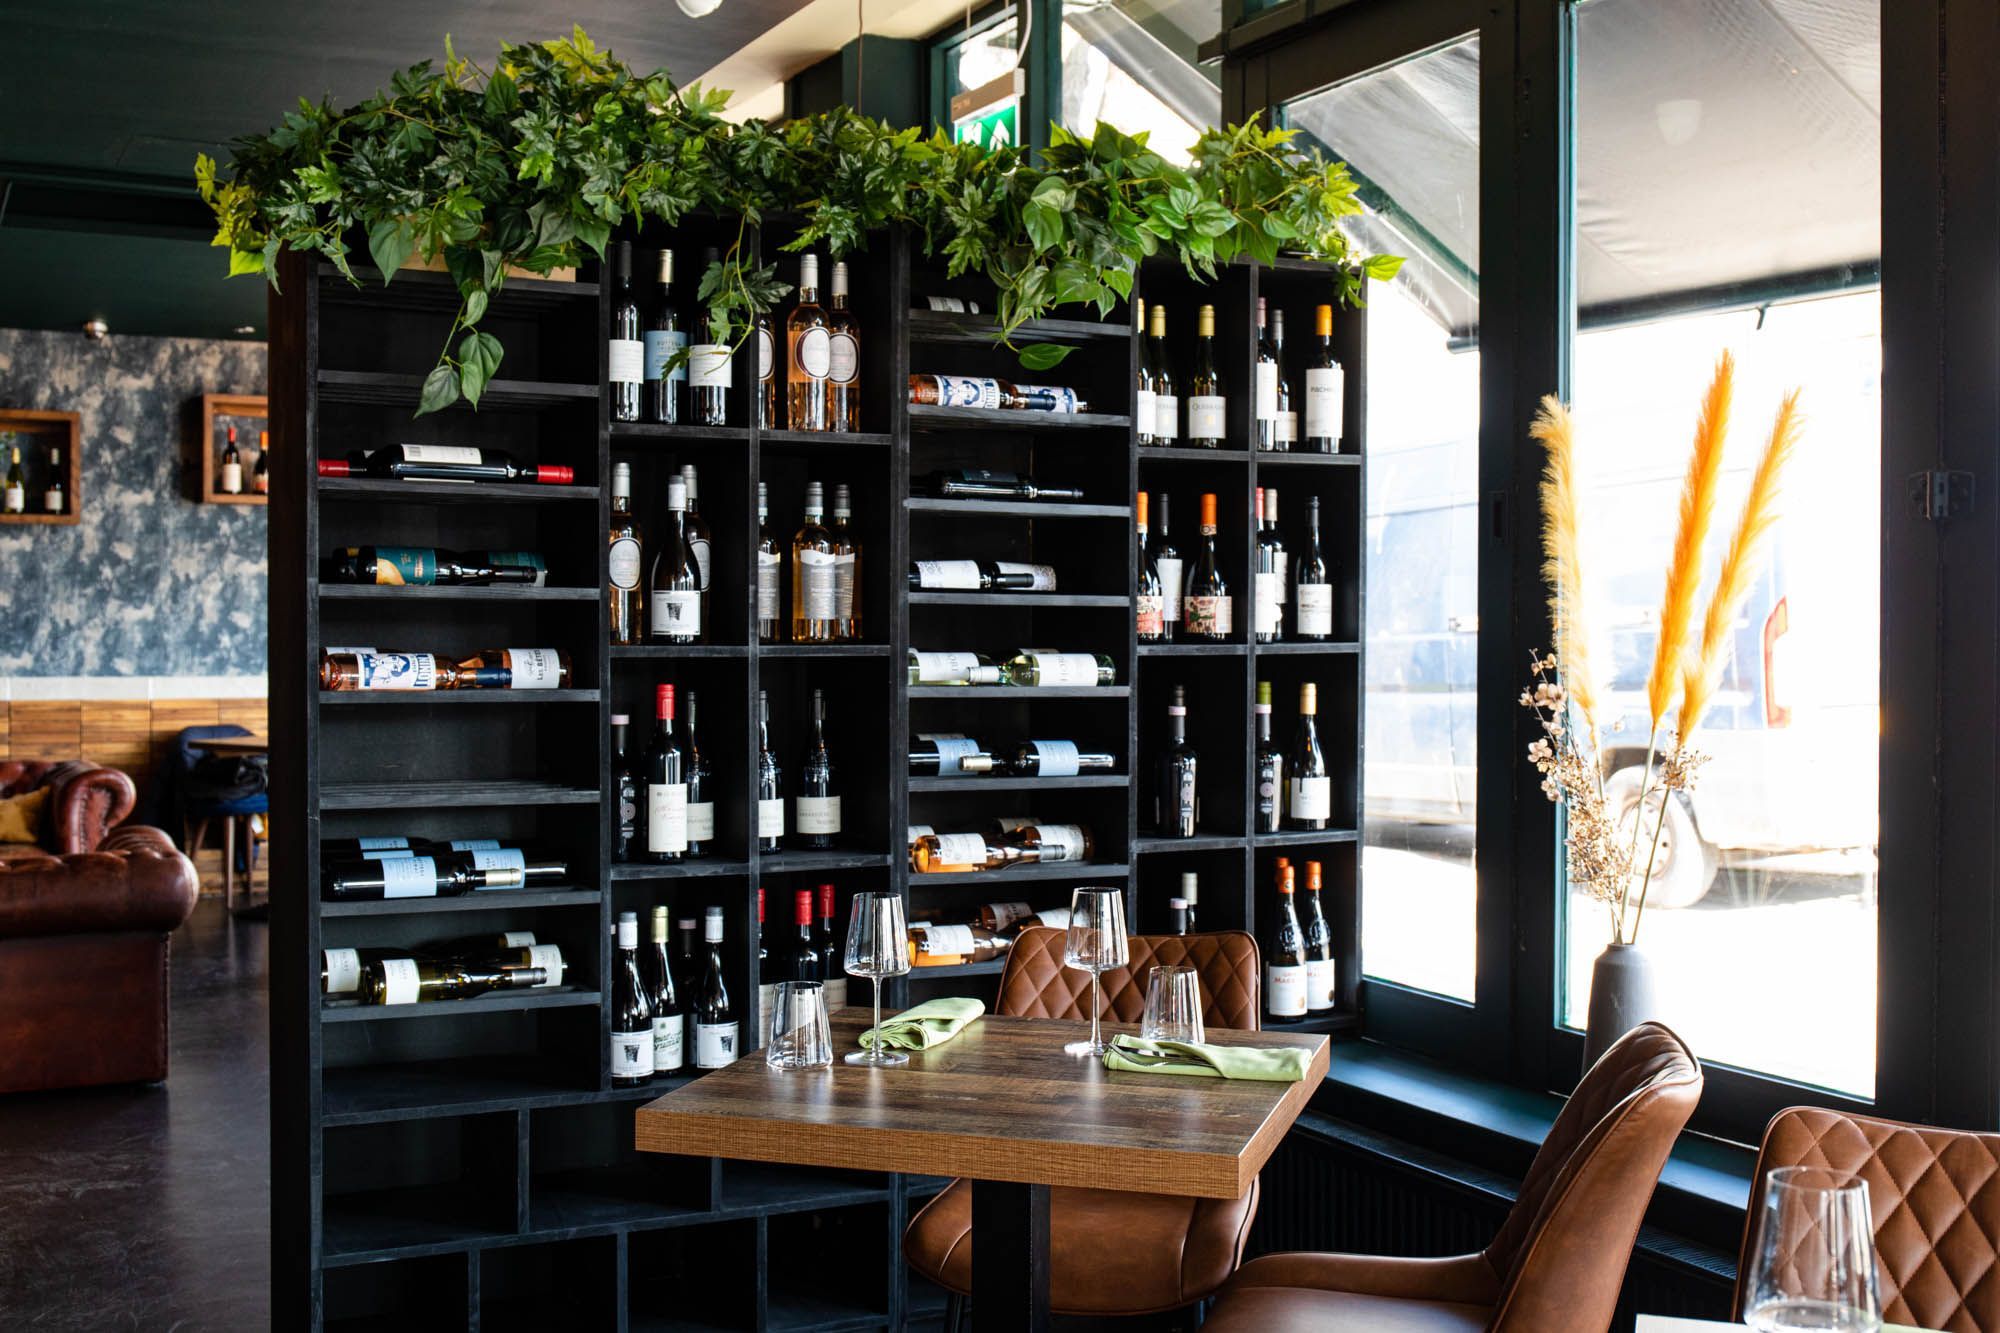 Black shelf unit filled with various quality wines at the restaurant Carne in Hove, small brown table and chairs situated next to eat and set to be served with food